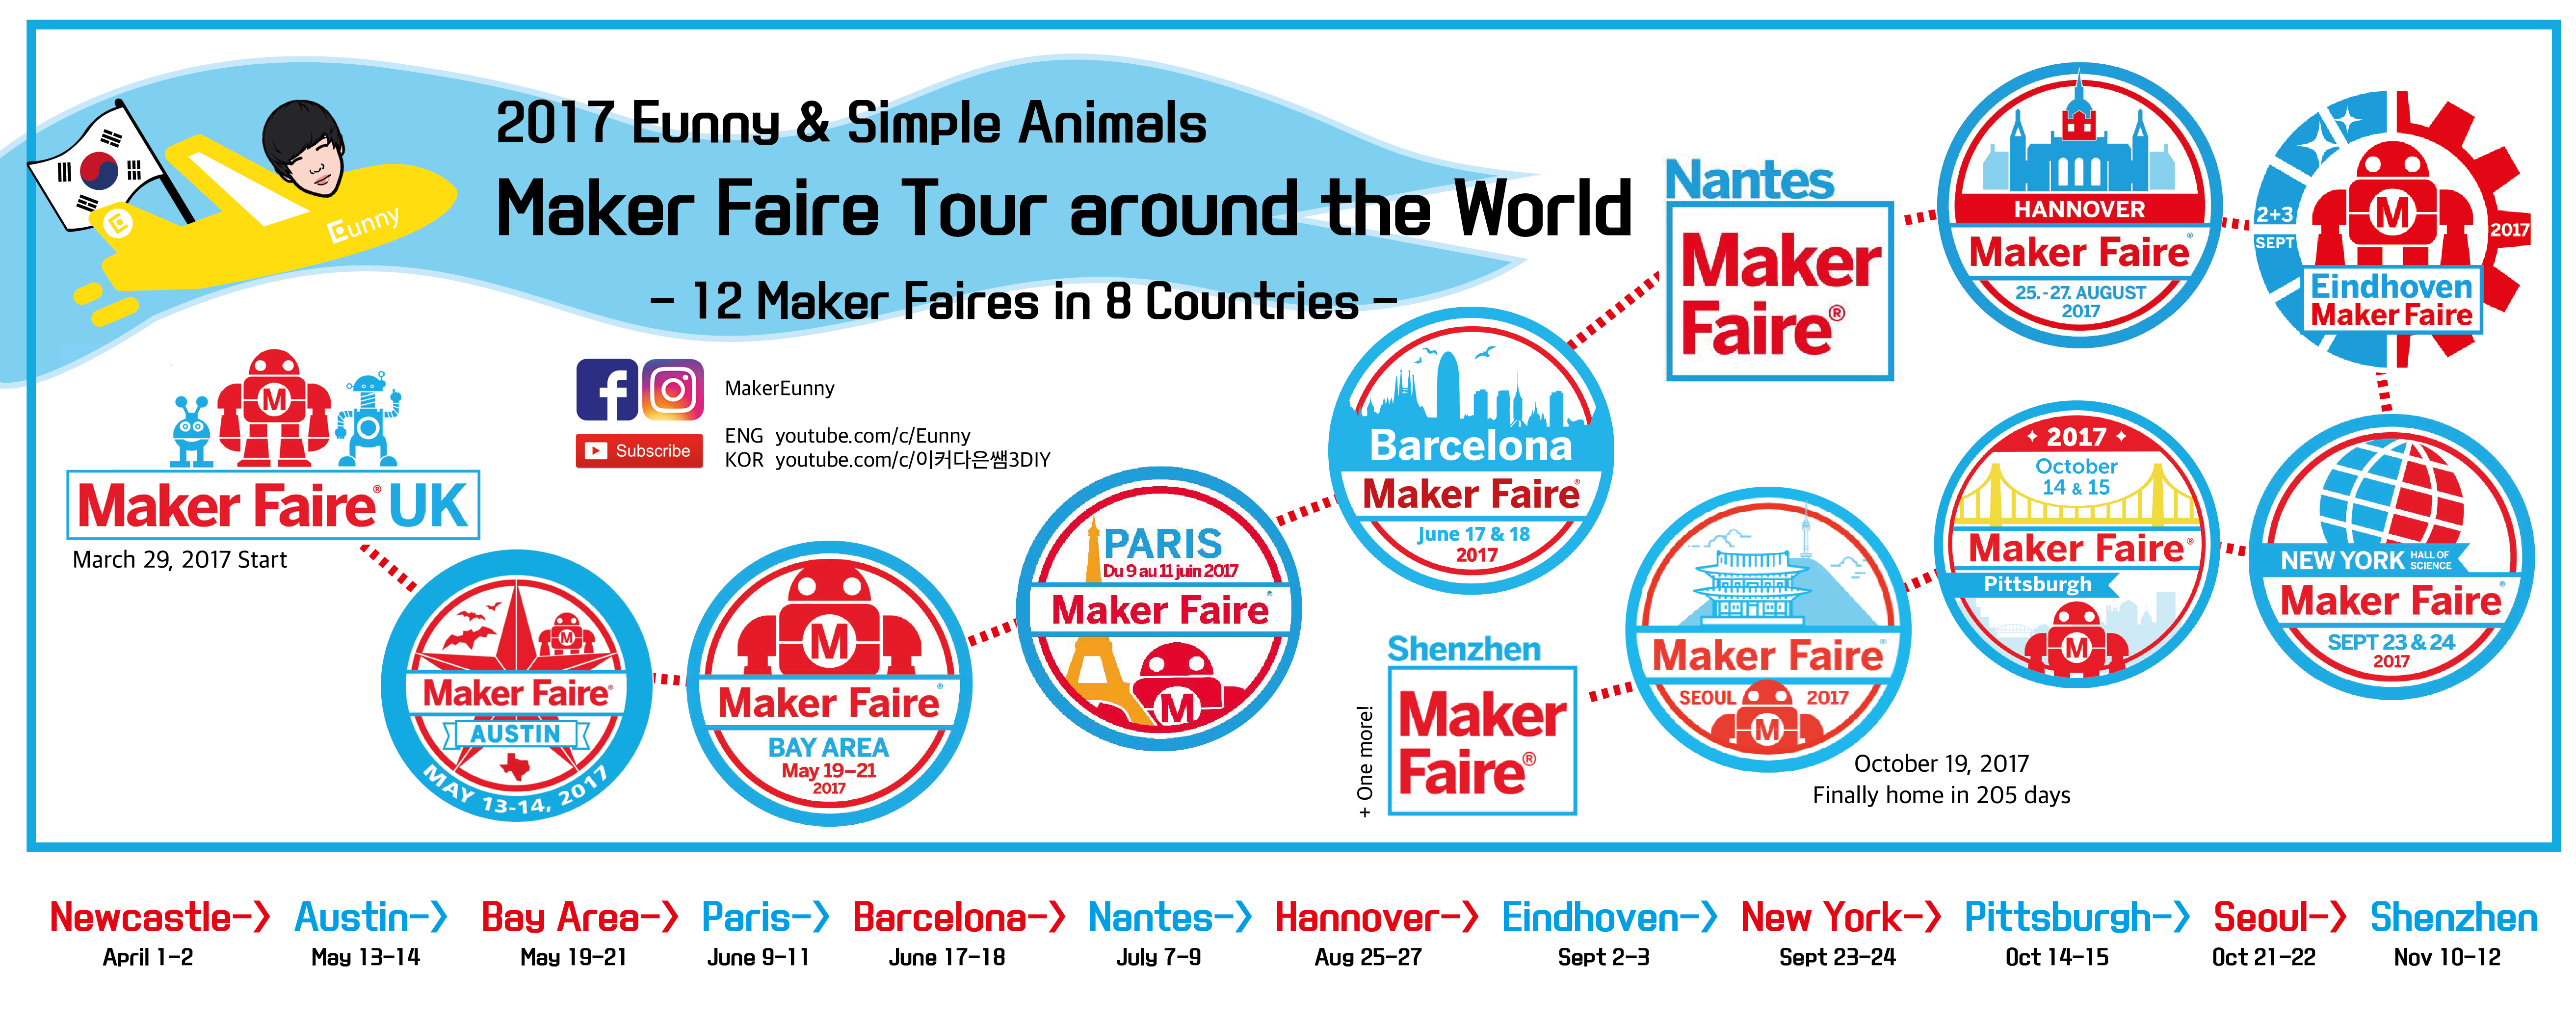 Maker Faire Tour 2017 Around the World - 12 Maker Faires in 8 Countries